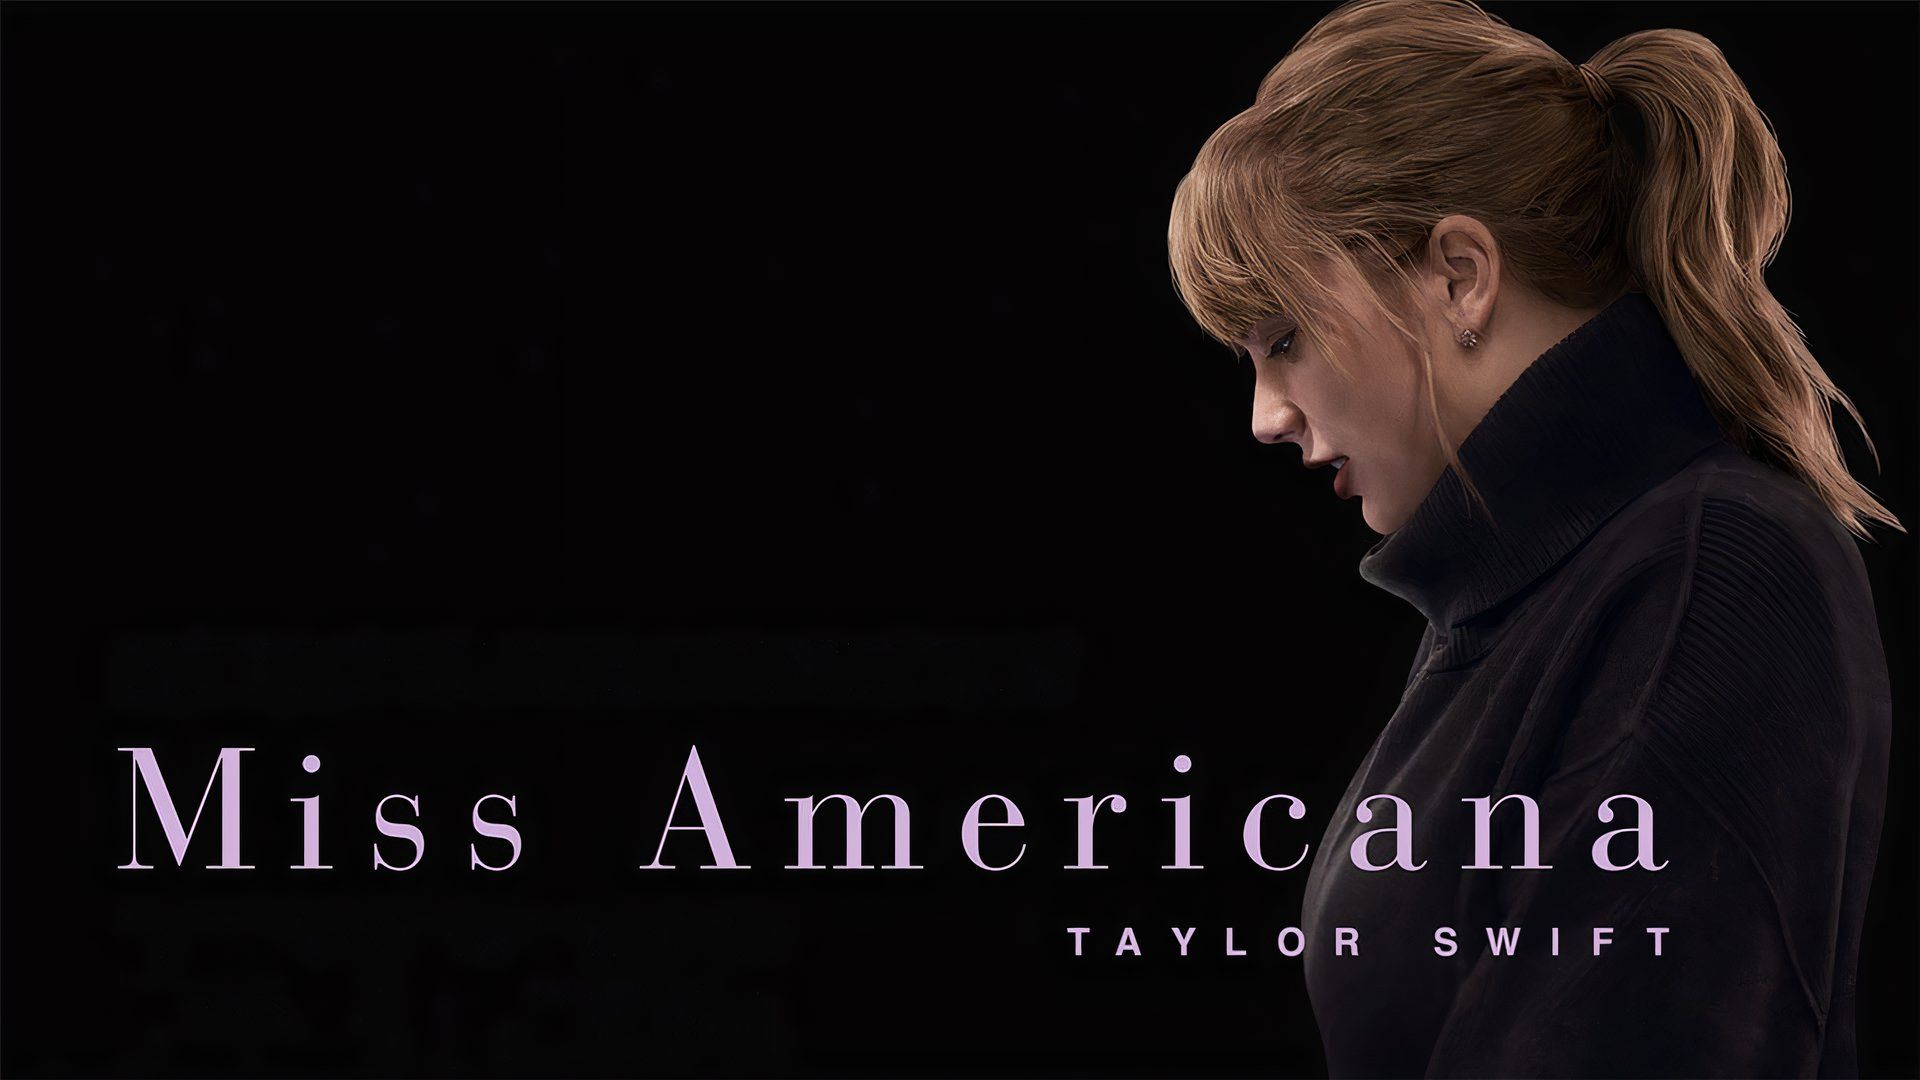 Poster for the 2022 Netflix original Miss Americana Taylor Swift